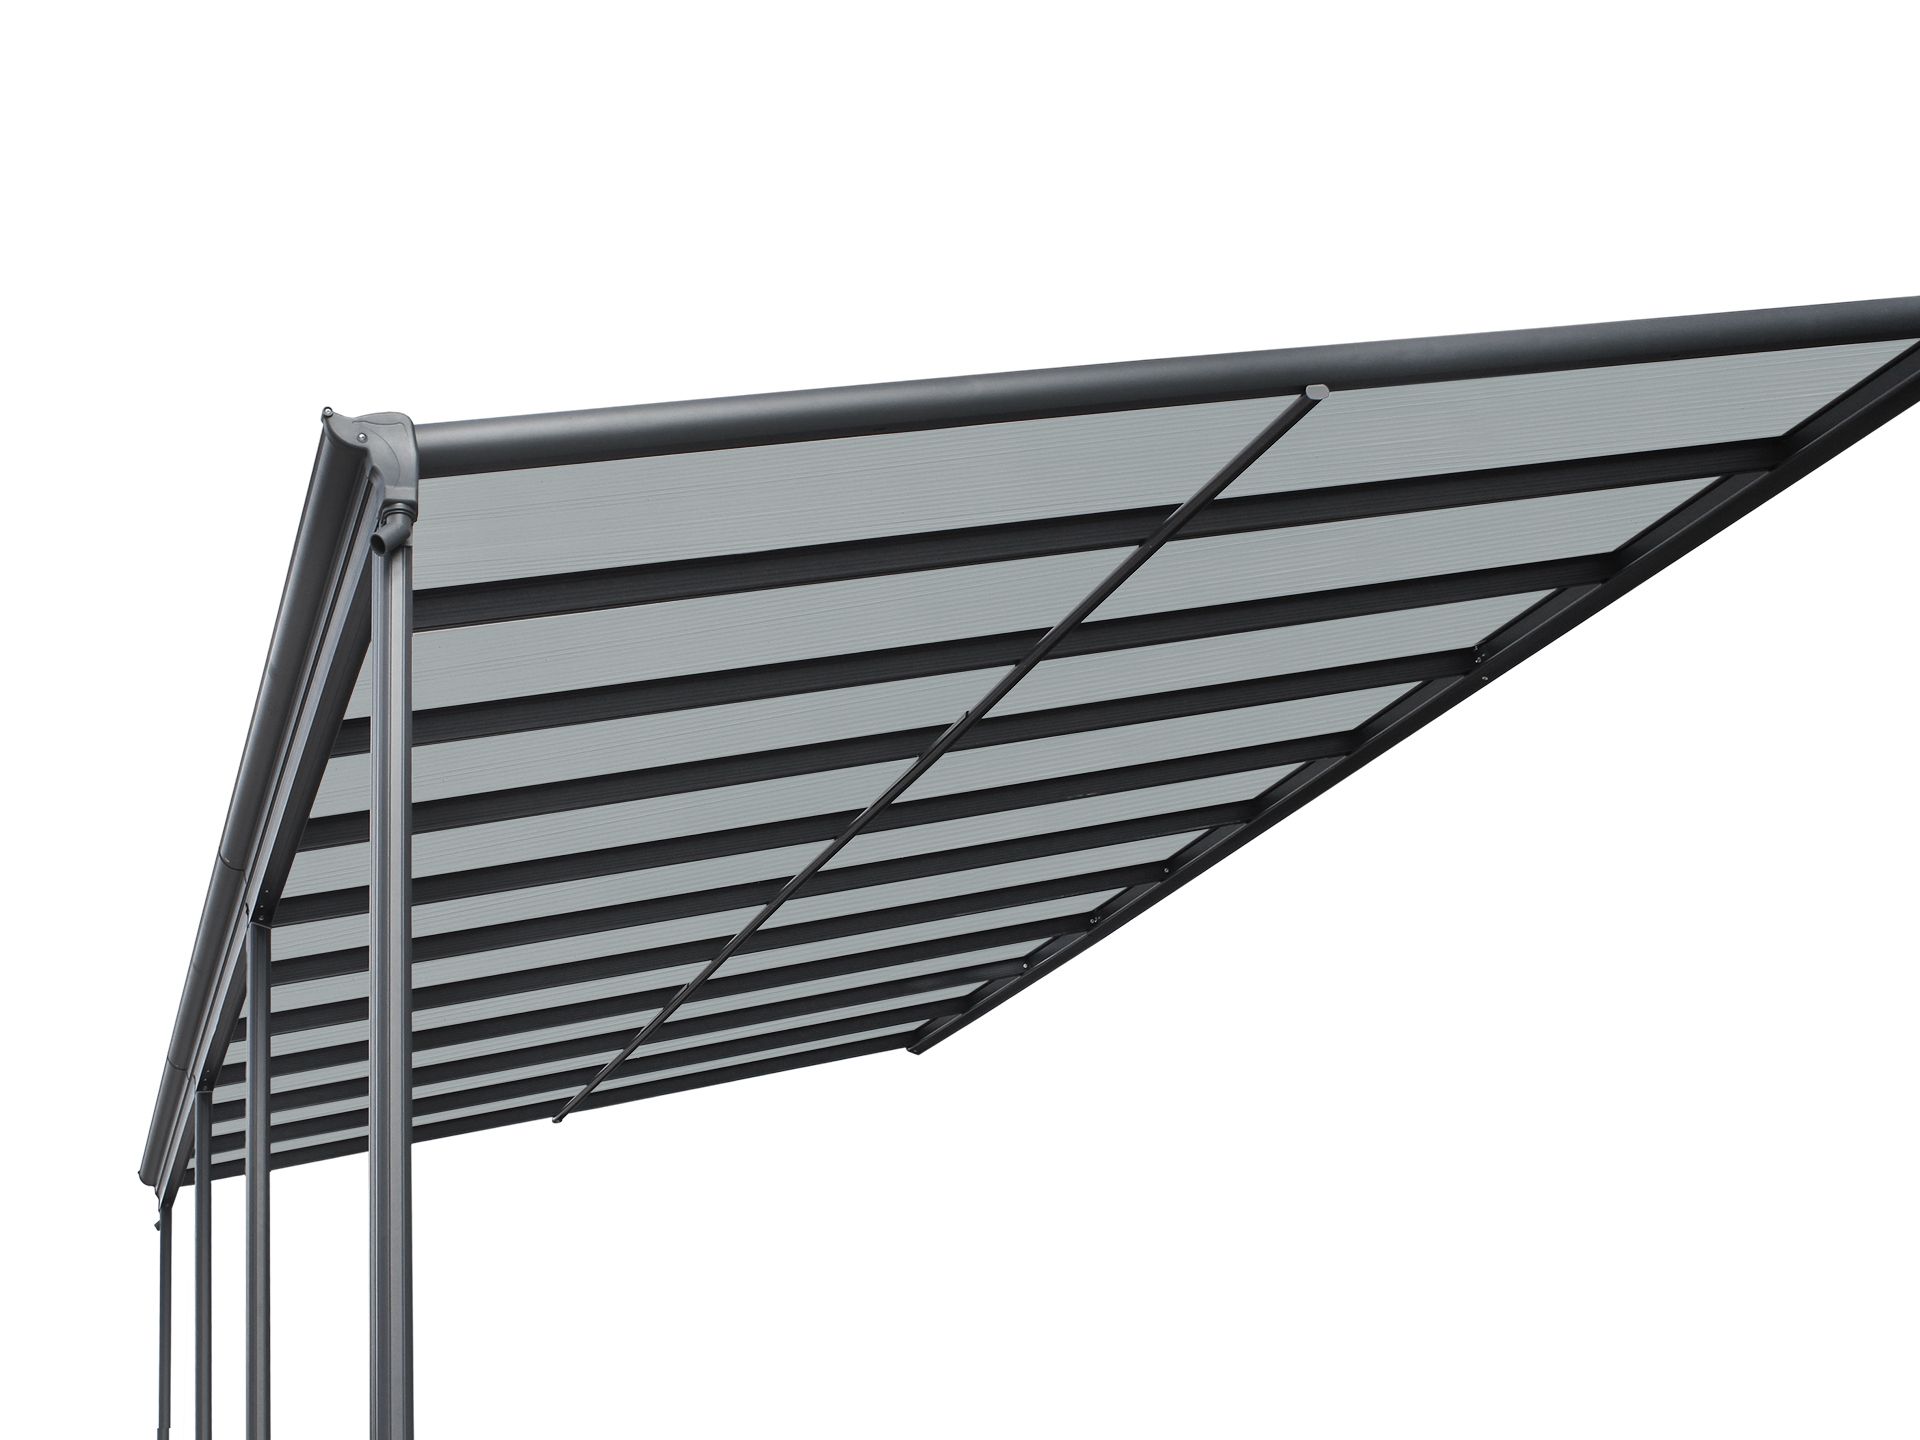 Toughout Patio Canopy Roof 6.18m x 3m x 2.58m - Charcoal Grey